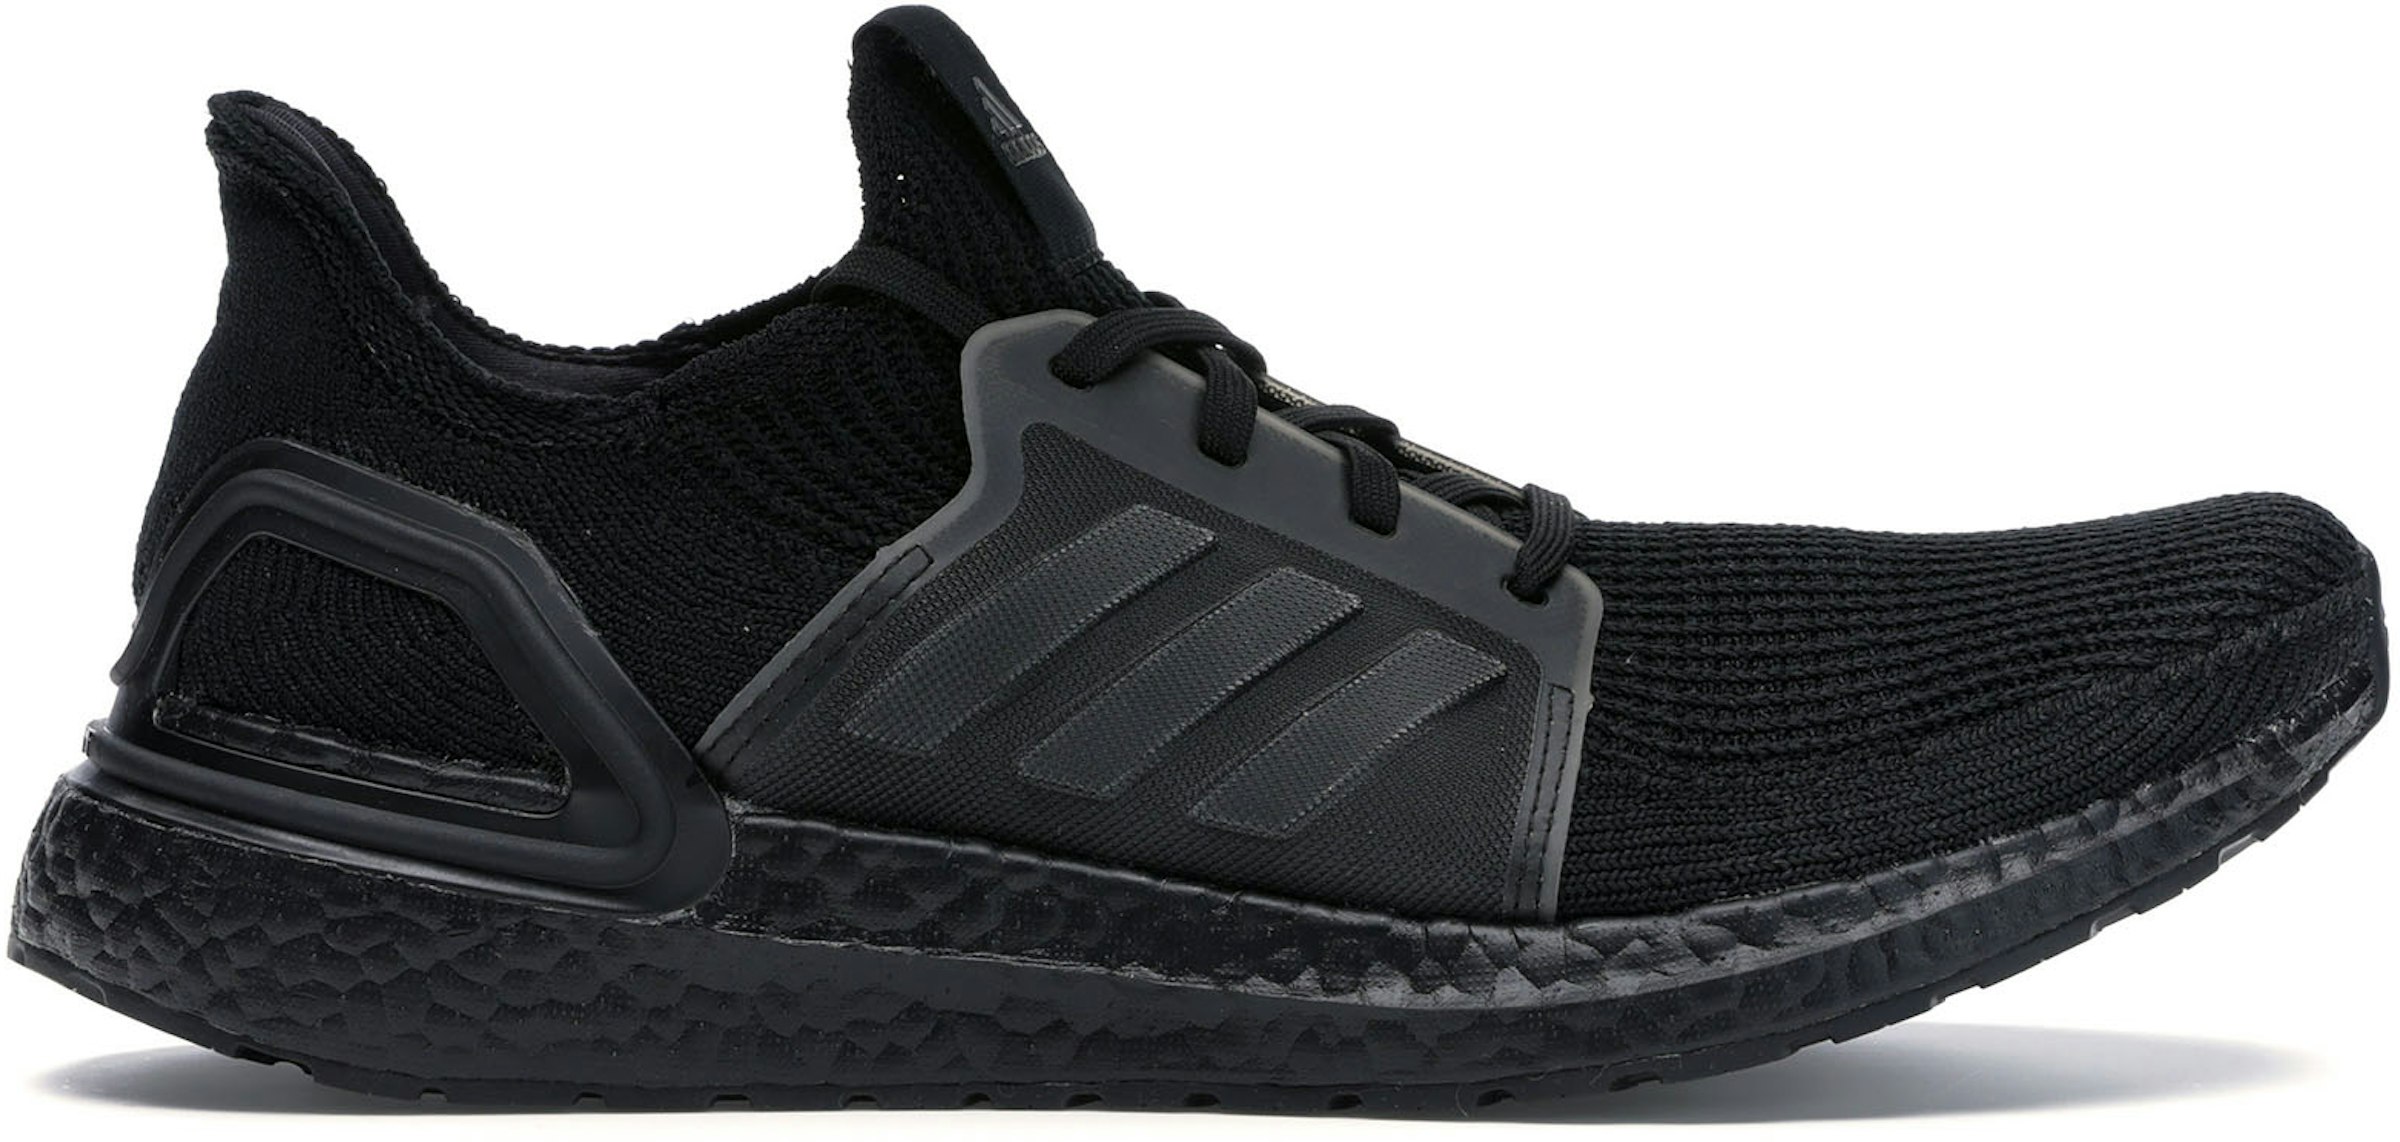 adidas Ultra Boost Shoes & New Sneakers - StockX